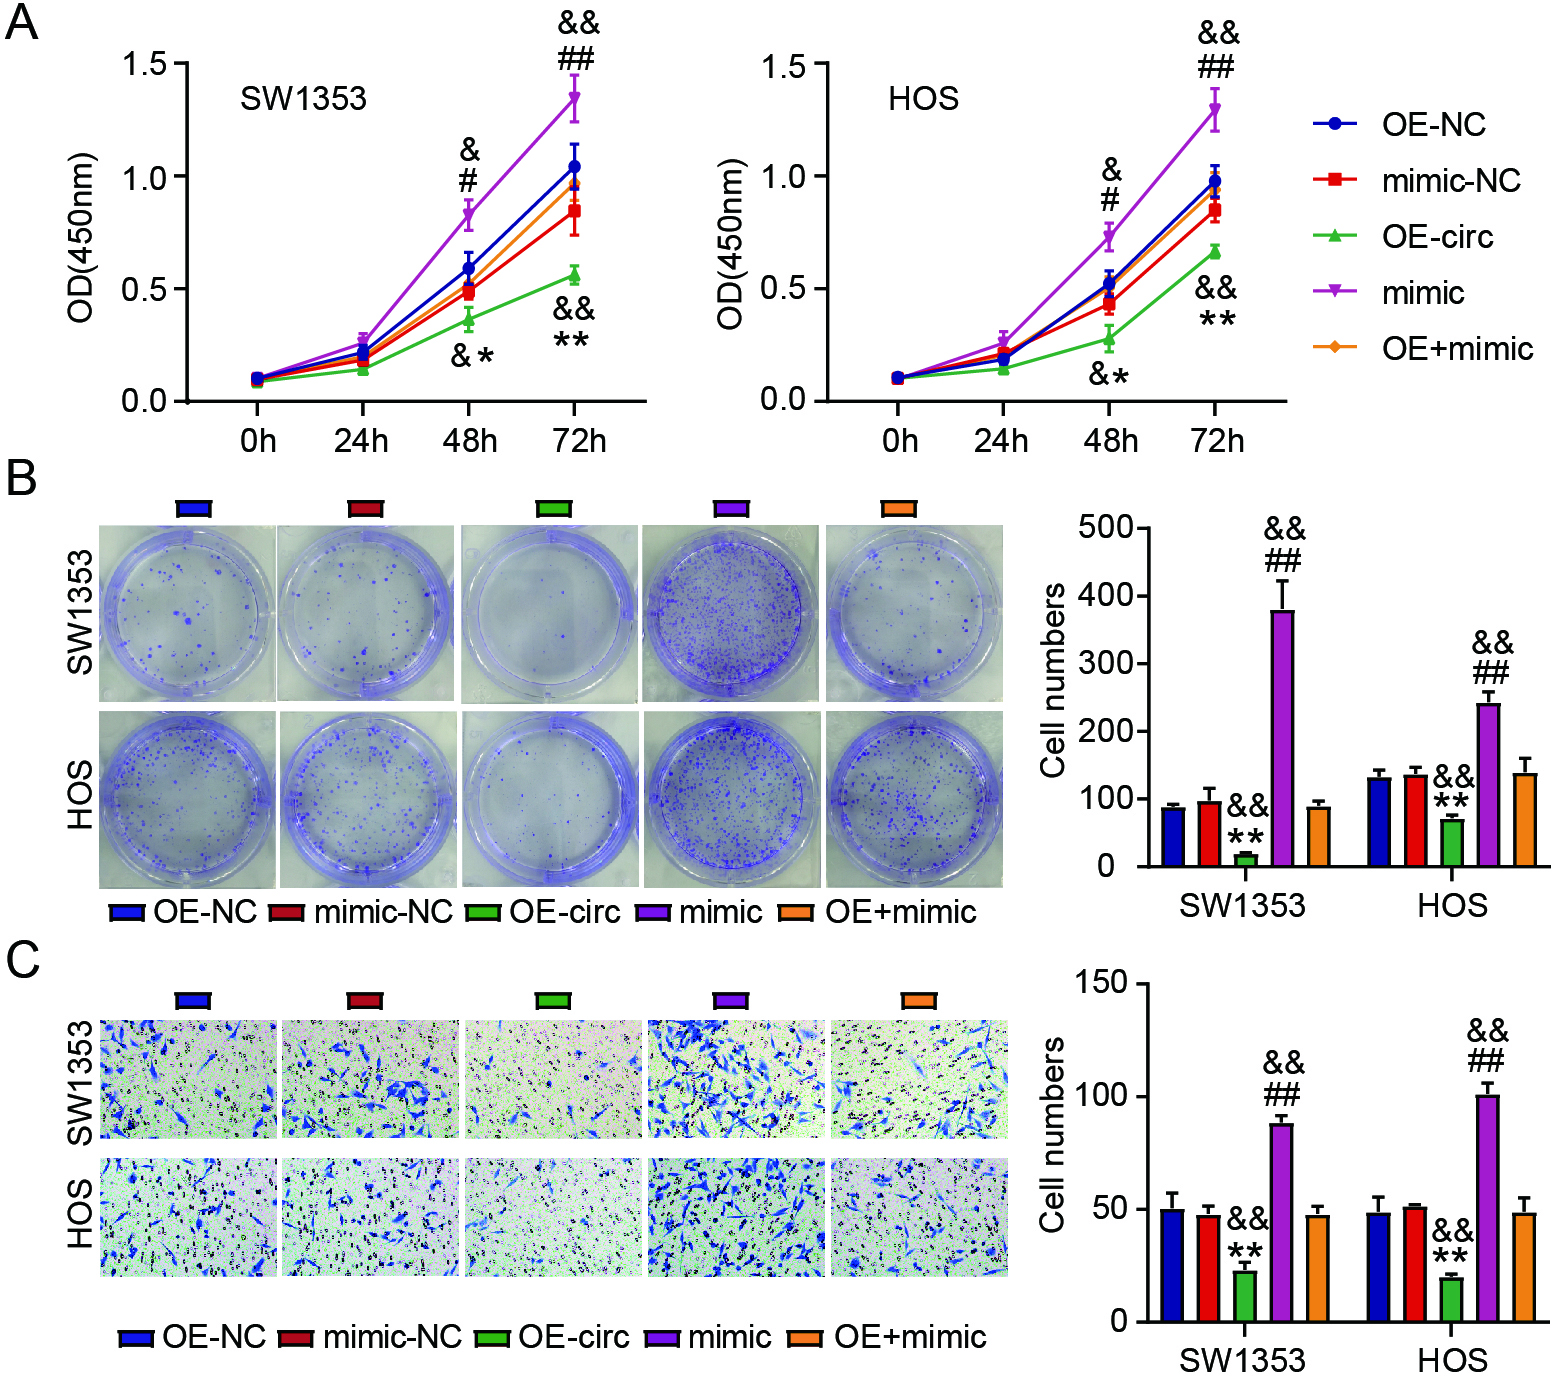 Circ_0049271 overexpression prohibits the invasion and proliferation of cells through miR-1197 modulation in OS. The viability (A) and colony numbers (B) of SW1353 and HOS cells transfected with OE-circ, OE-NC, mimic, mimic-NC, or OE-circ + mimic were measured by means of the CCK-8 and colony formation experiments. (C) SW1353 and HOS cell invasion was evaluated through the transwell experiment. # P < 0.05; # # P < 0.01 vs. mimic-NC. & P < 0.05; & & P < 0.01 vs. OE-circ + mimic. ∗P < 0.05; ∗∗P < 0.01 vs. OE-NC.